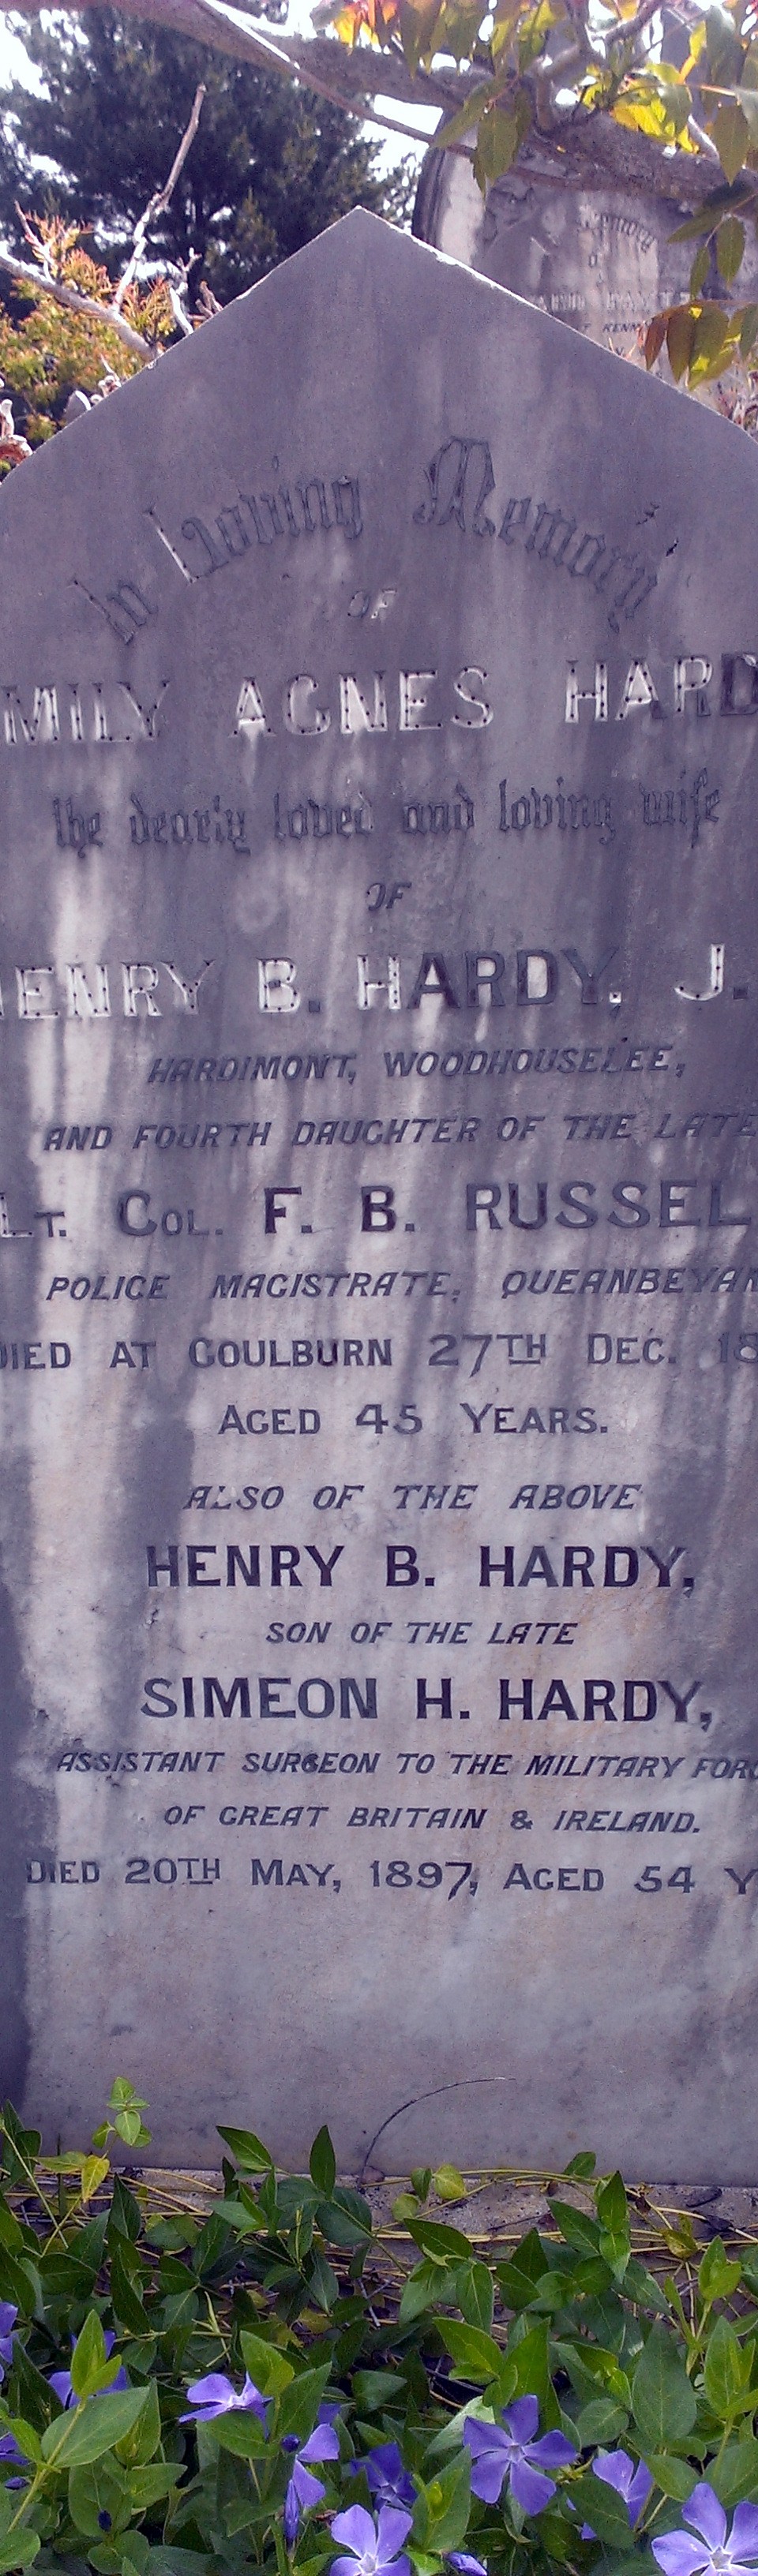 F. B. RUSSELL - Grave of Emily Agnes HARDY - 4th daughter of the Late Lt. Col. F. B. Russell.